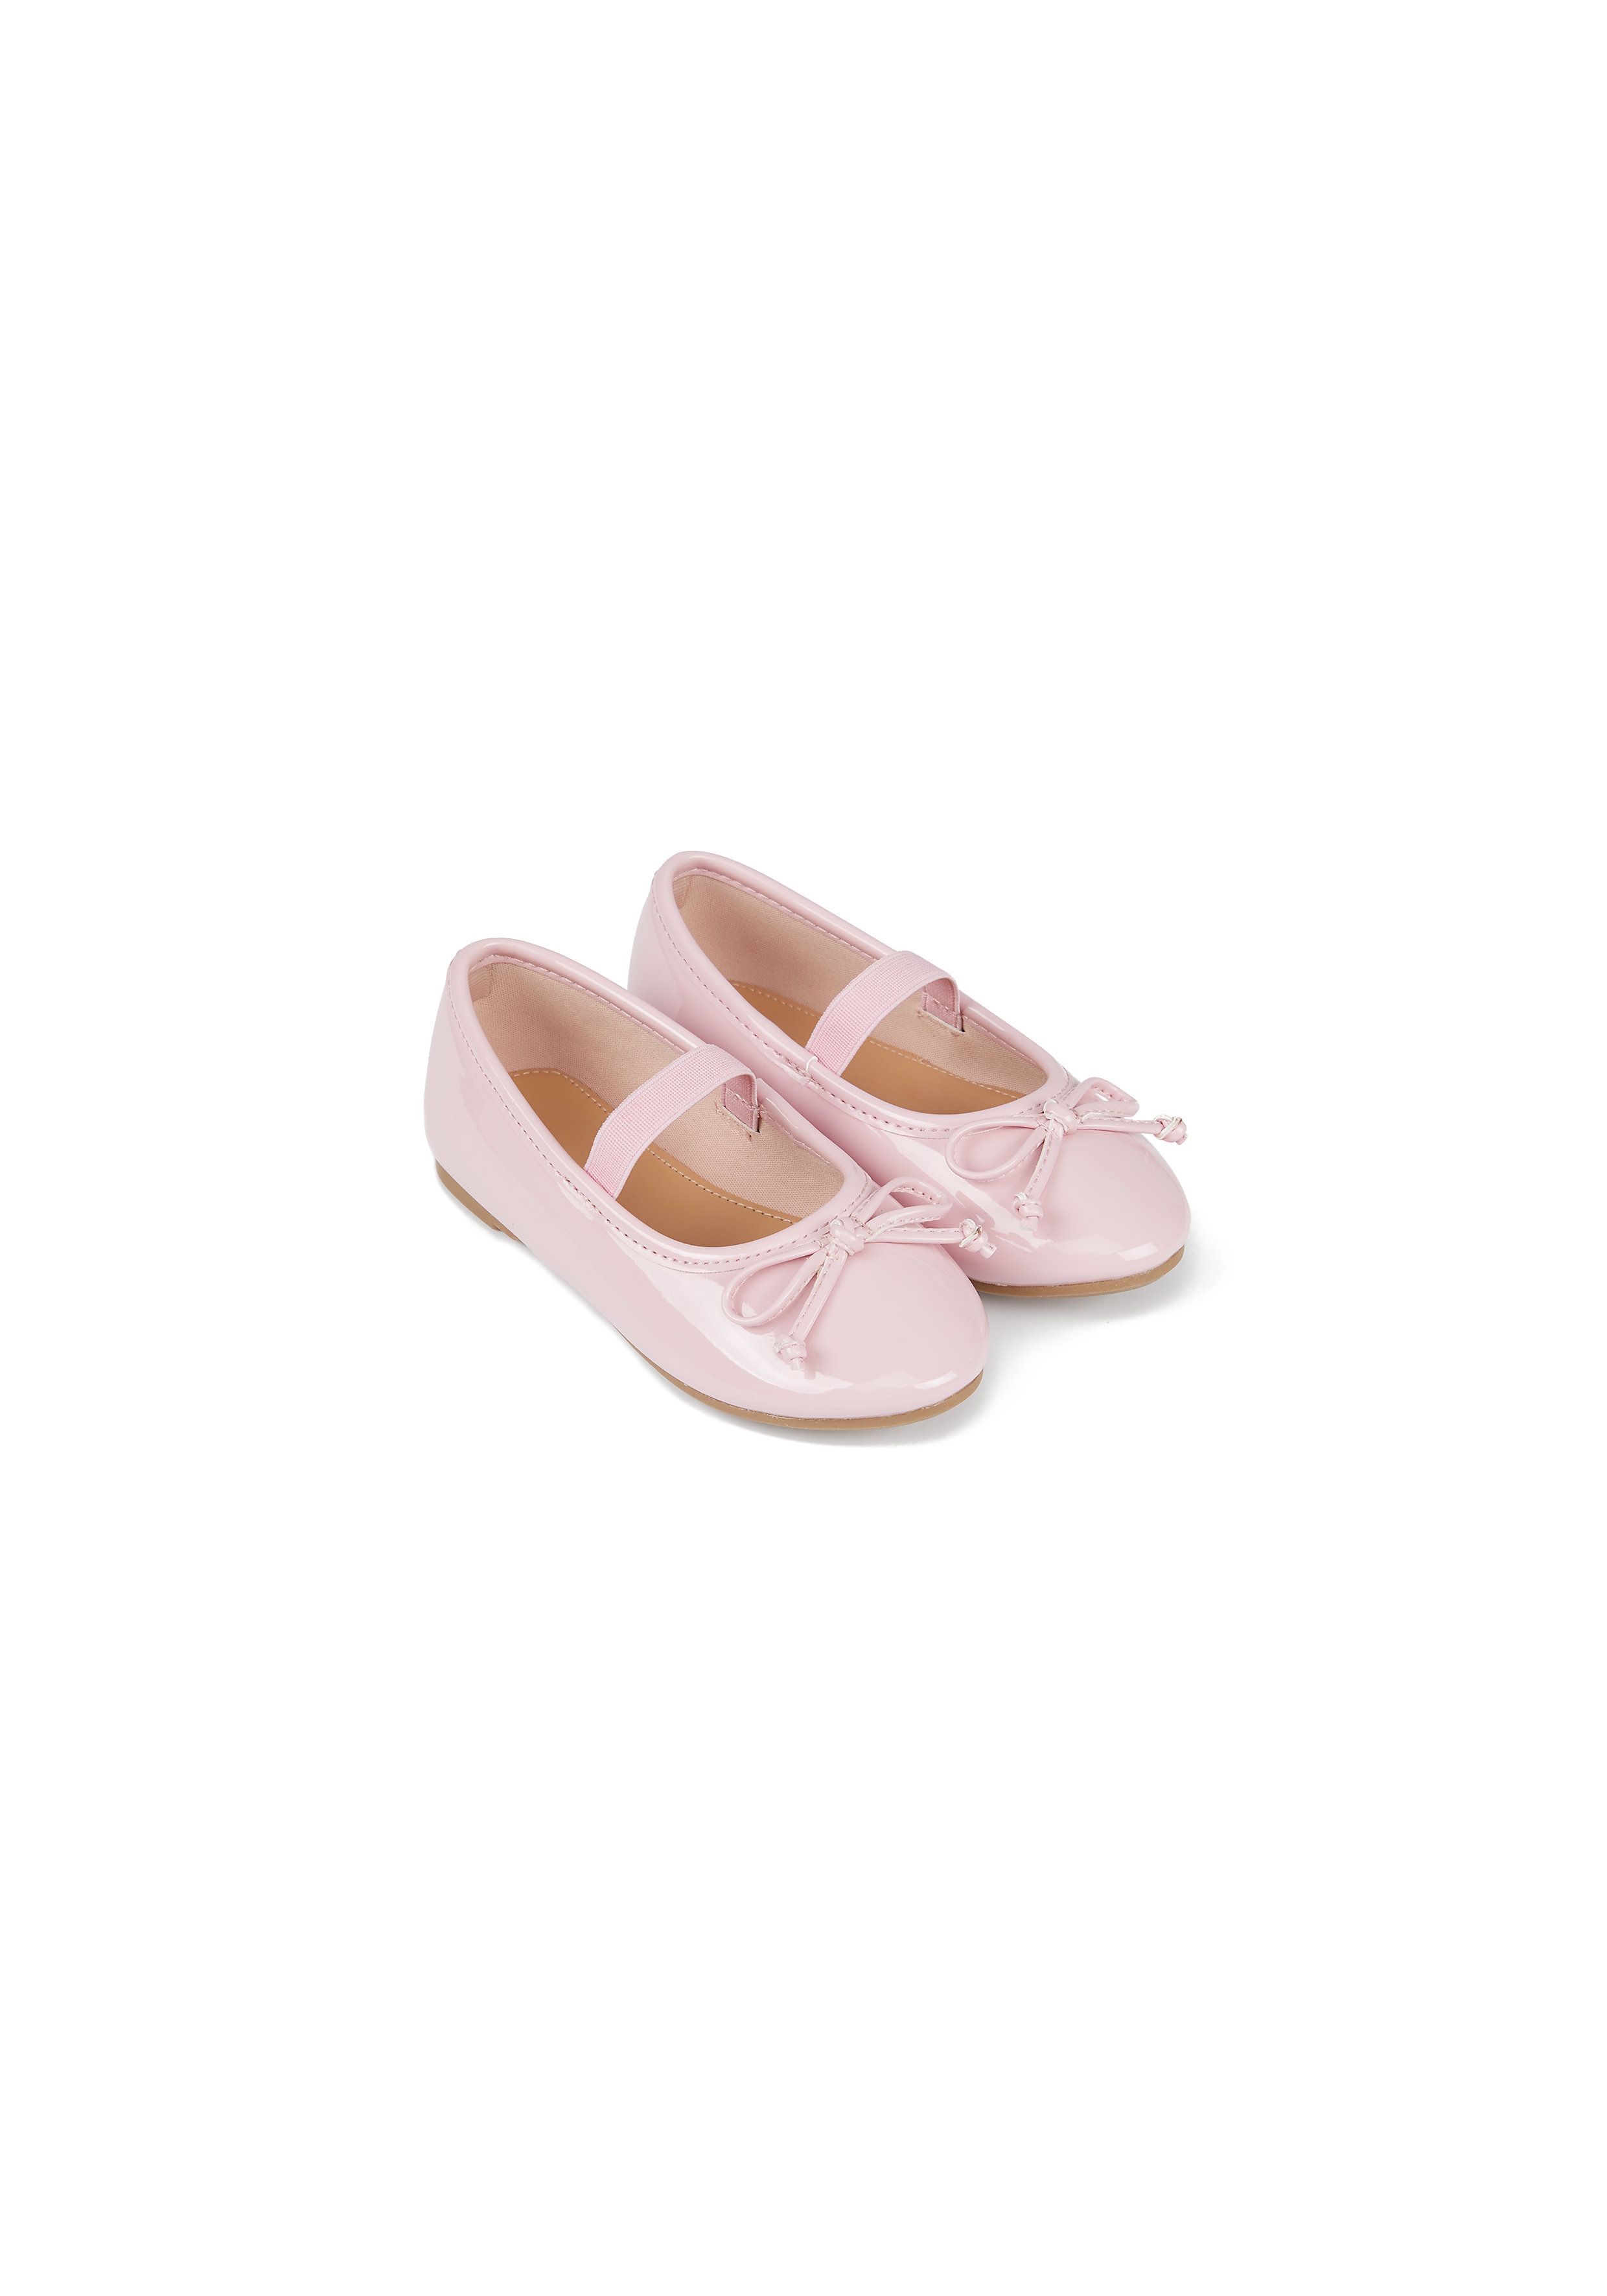 Mothercare | Girls Ballerina Shoes Bow Detail - Pink 0